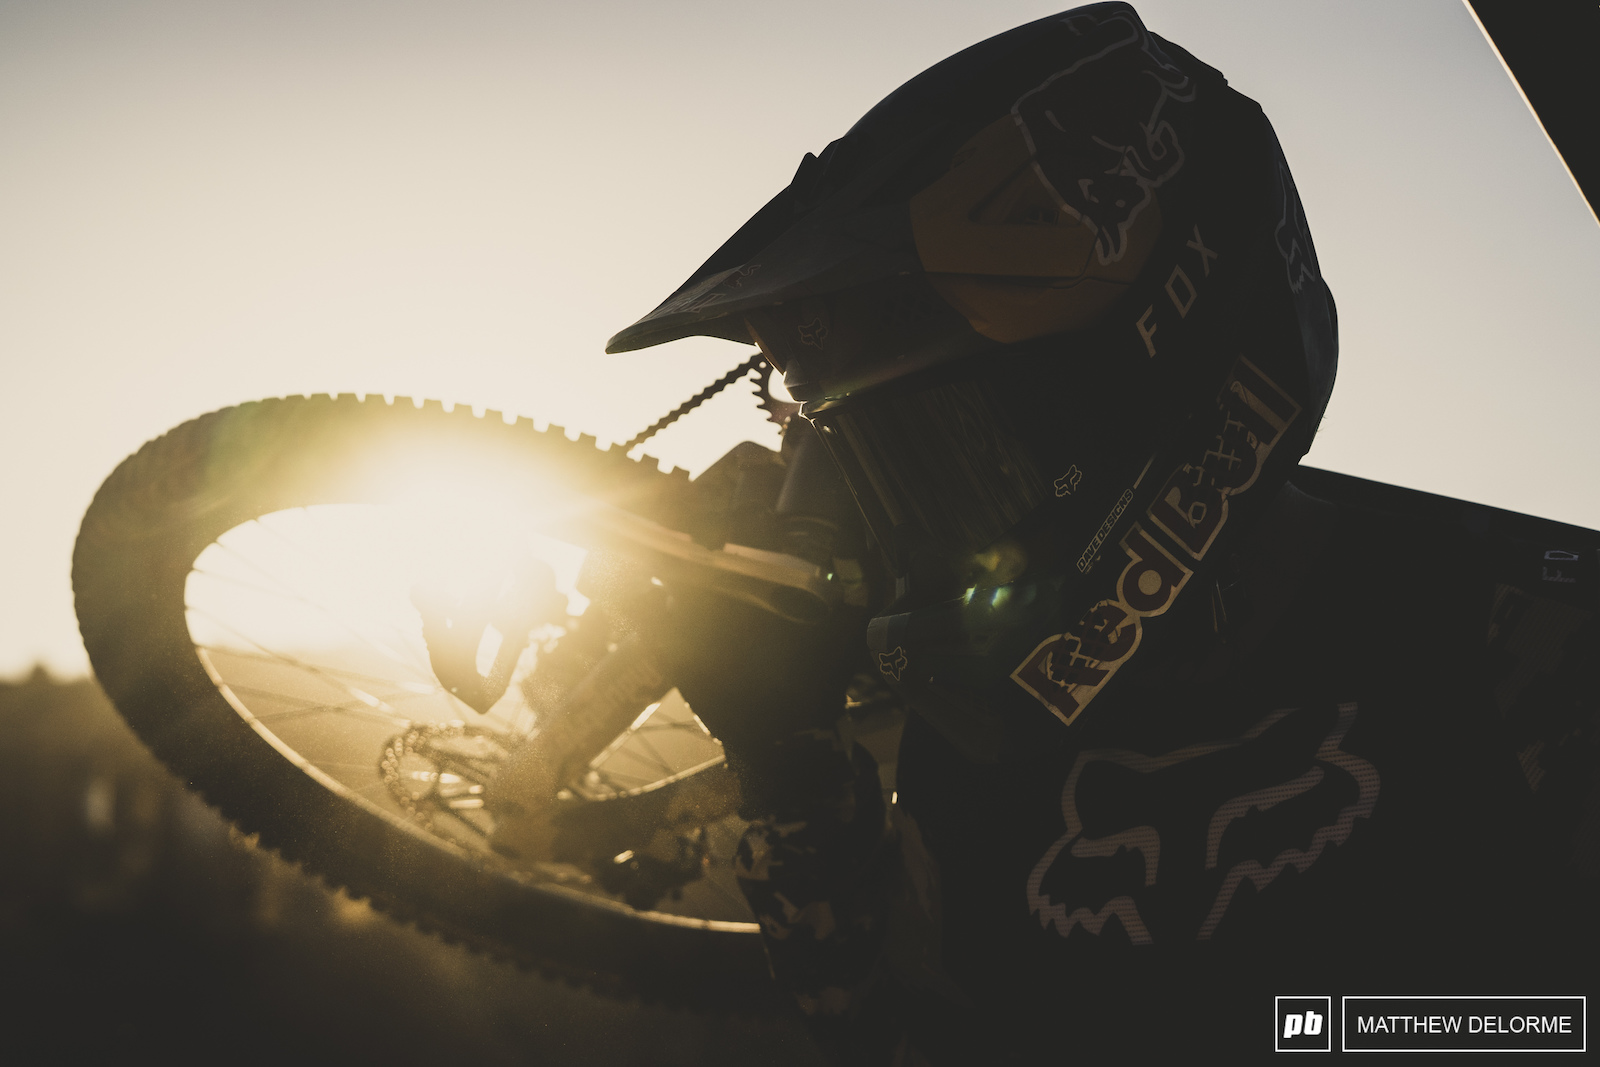 That s all for day one. We will see you tomorrow with more riding action from the desert.